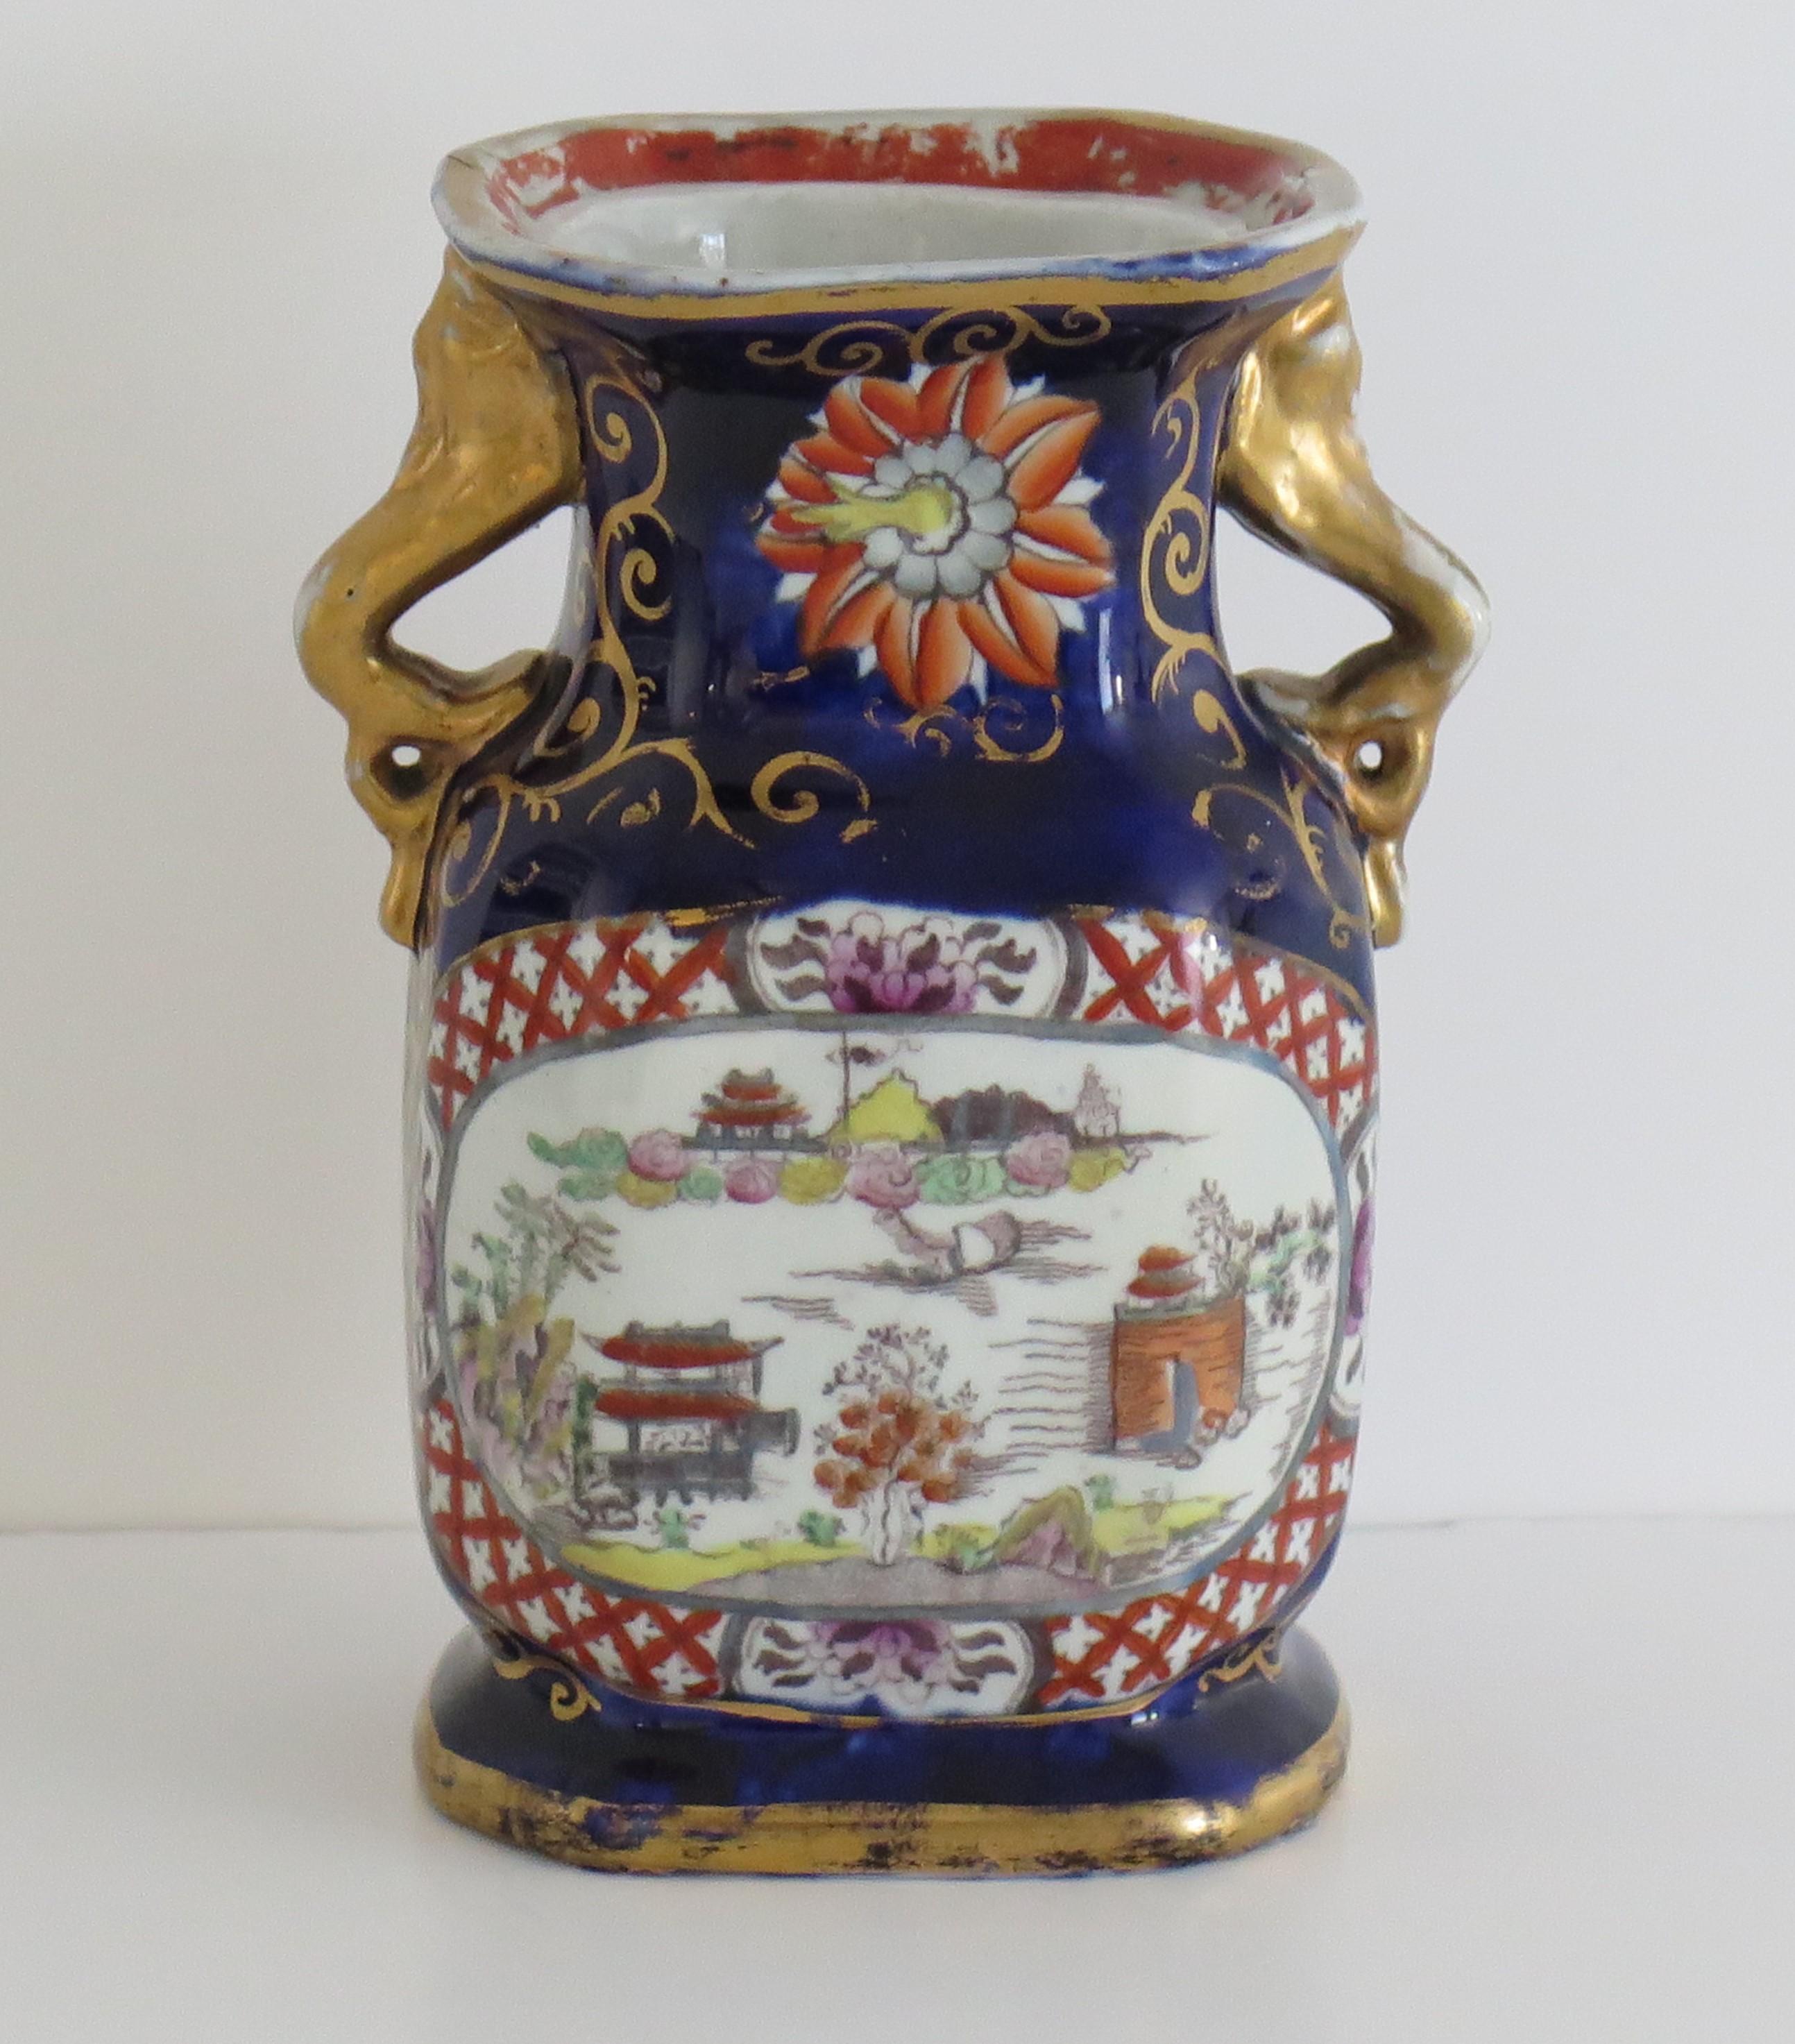 This is a rare shaped mid size ironstone vase, in the Canton pattern, made by the Mason's factory in the early 19th century.

The vase has a good profile, having an octagonal shape, with two dolphin side handles. The vase is decorated with a